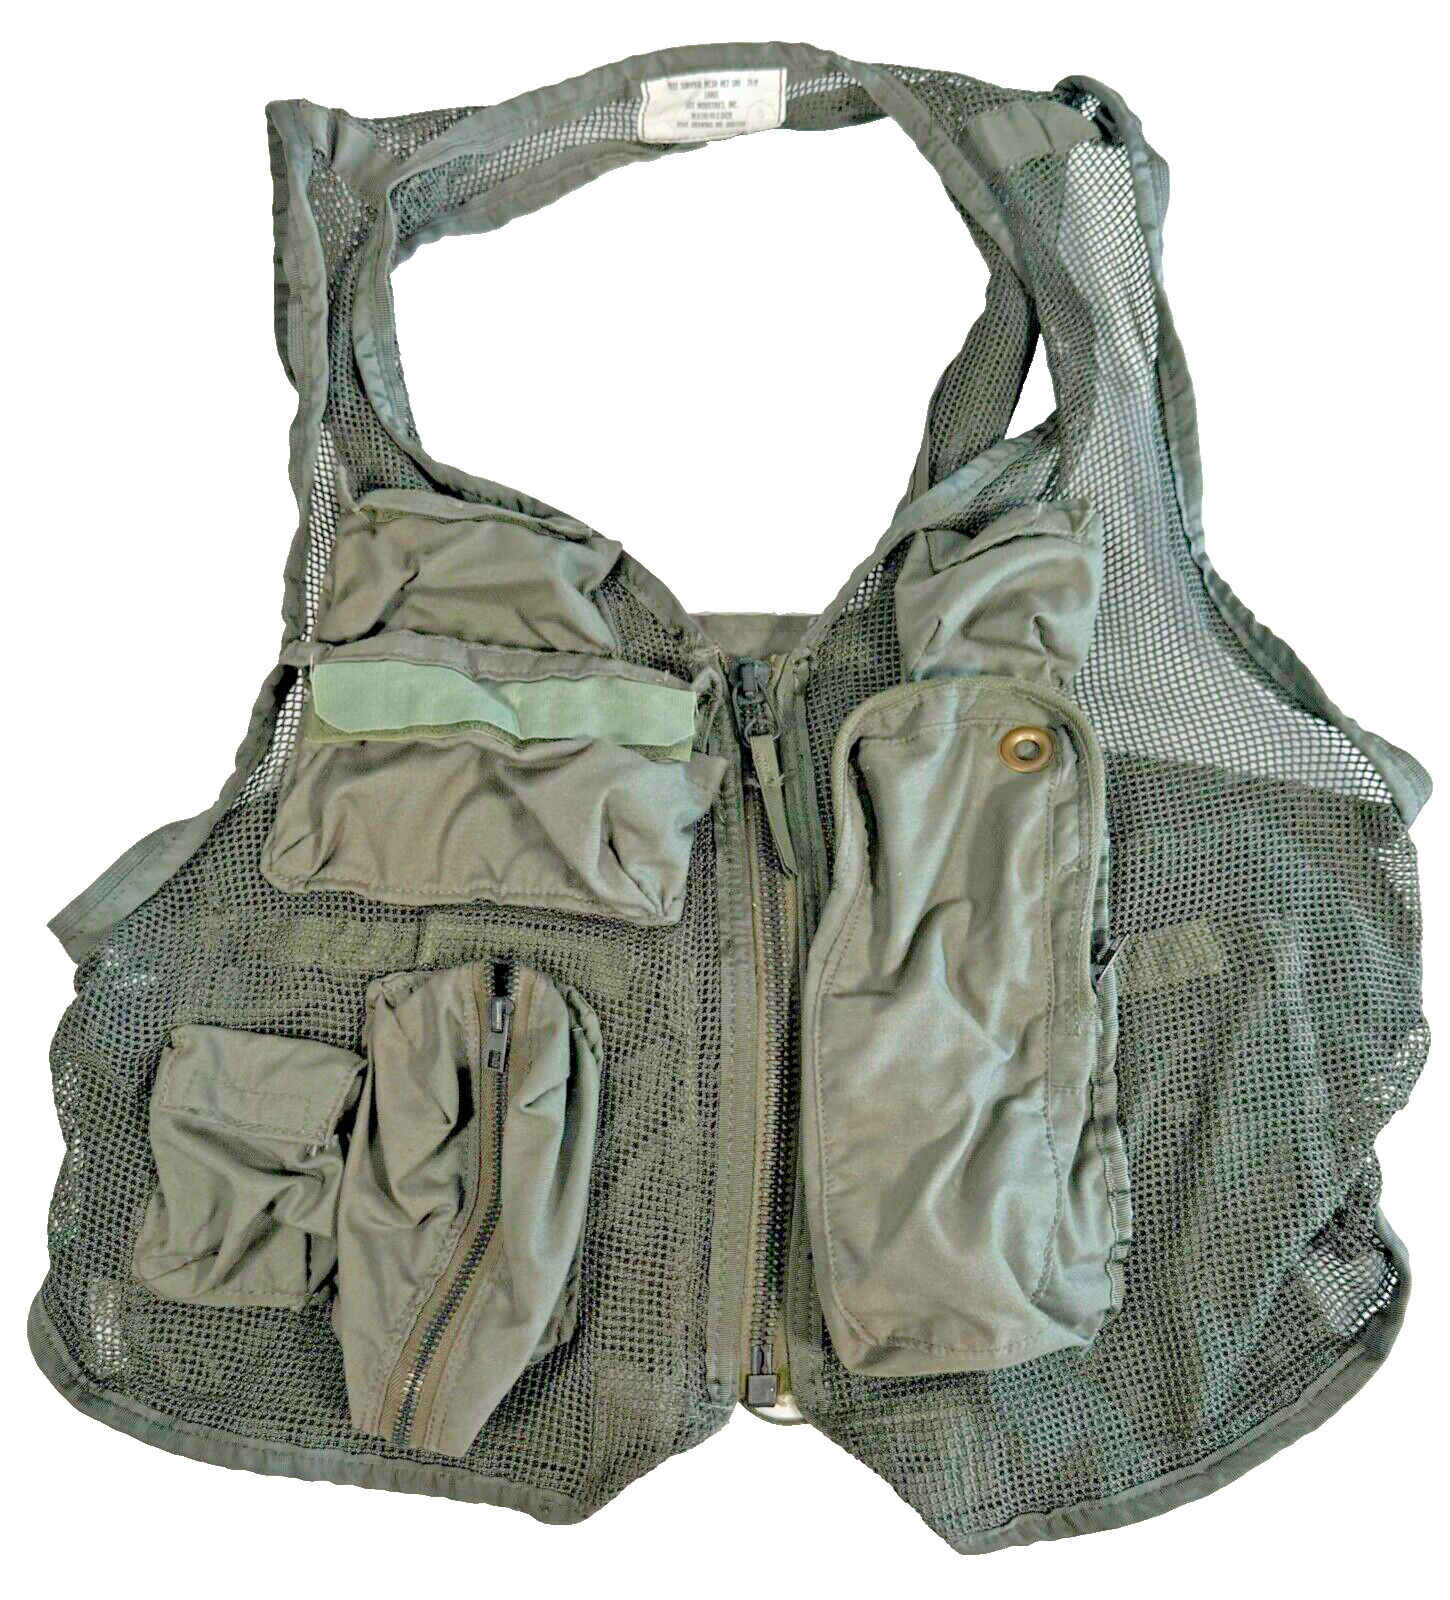 New USAF Air Force SRU-21/P Mesh Net Survival Vest with Pouches & Holster Large